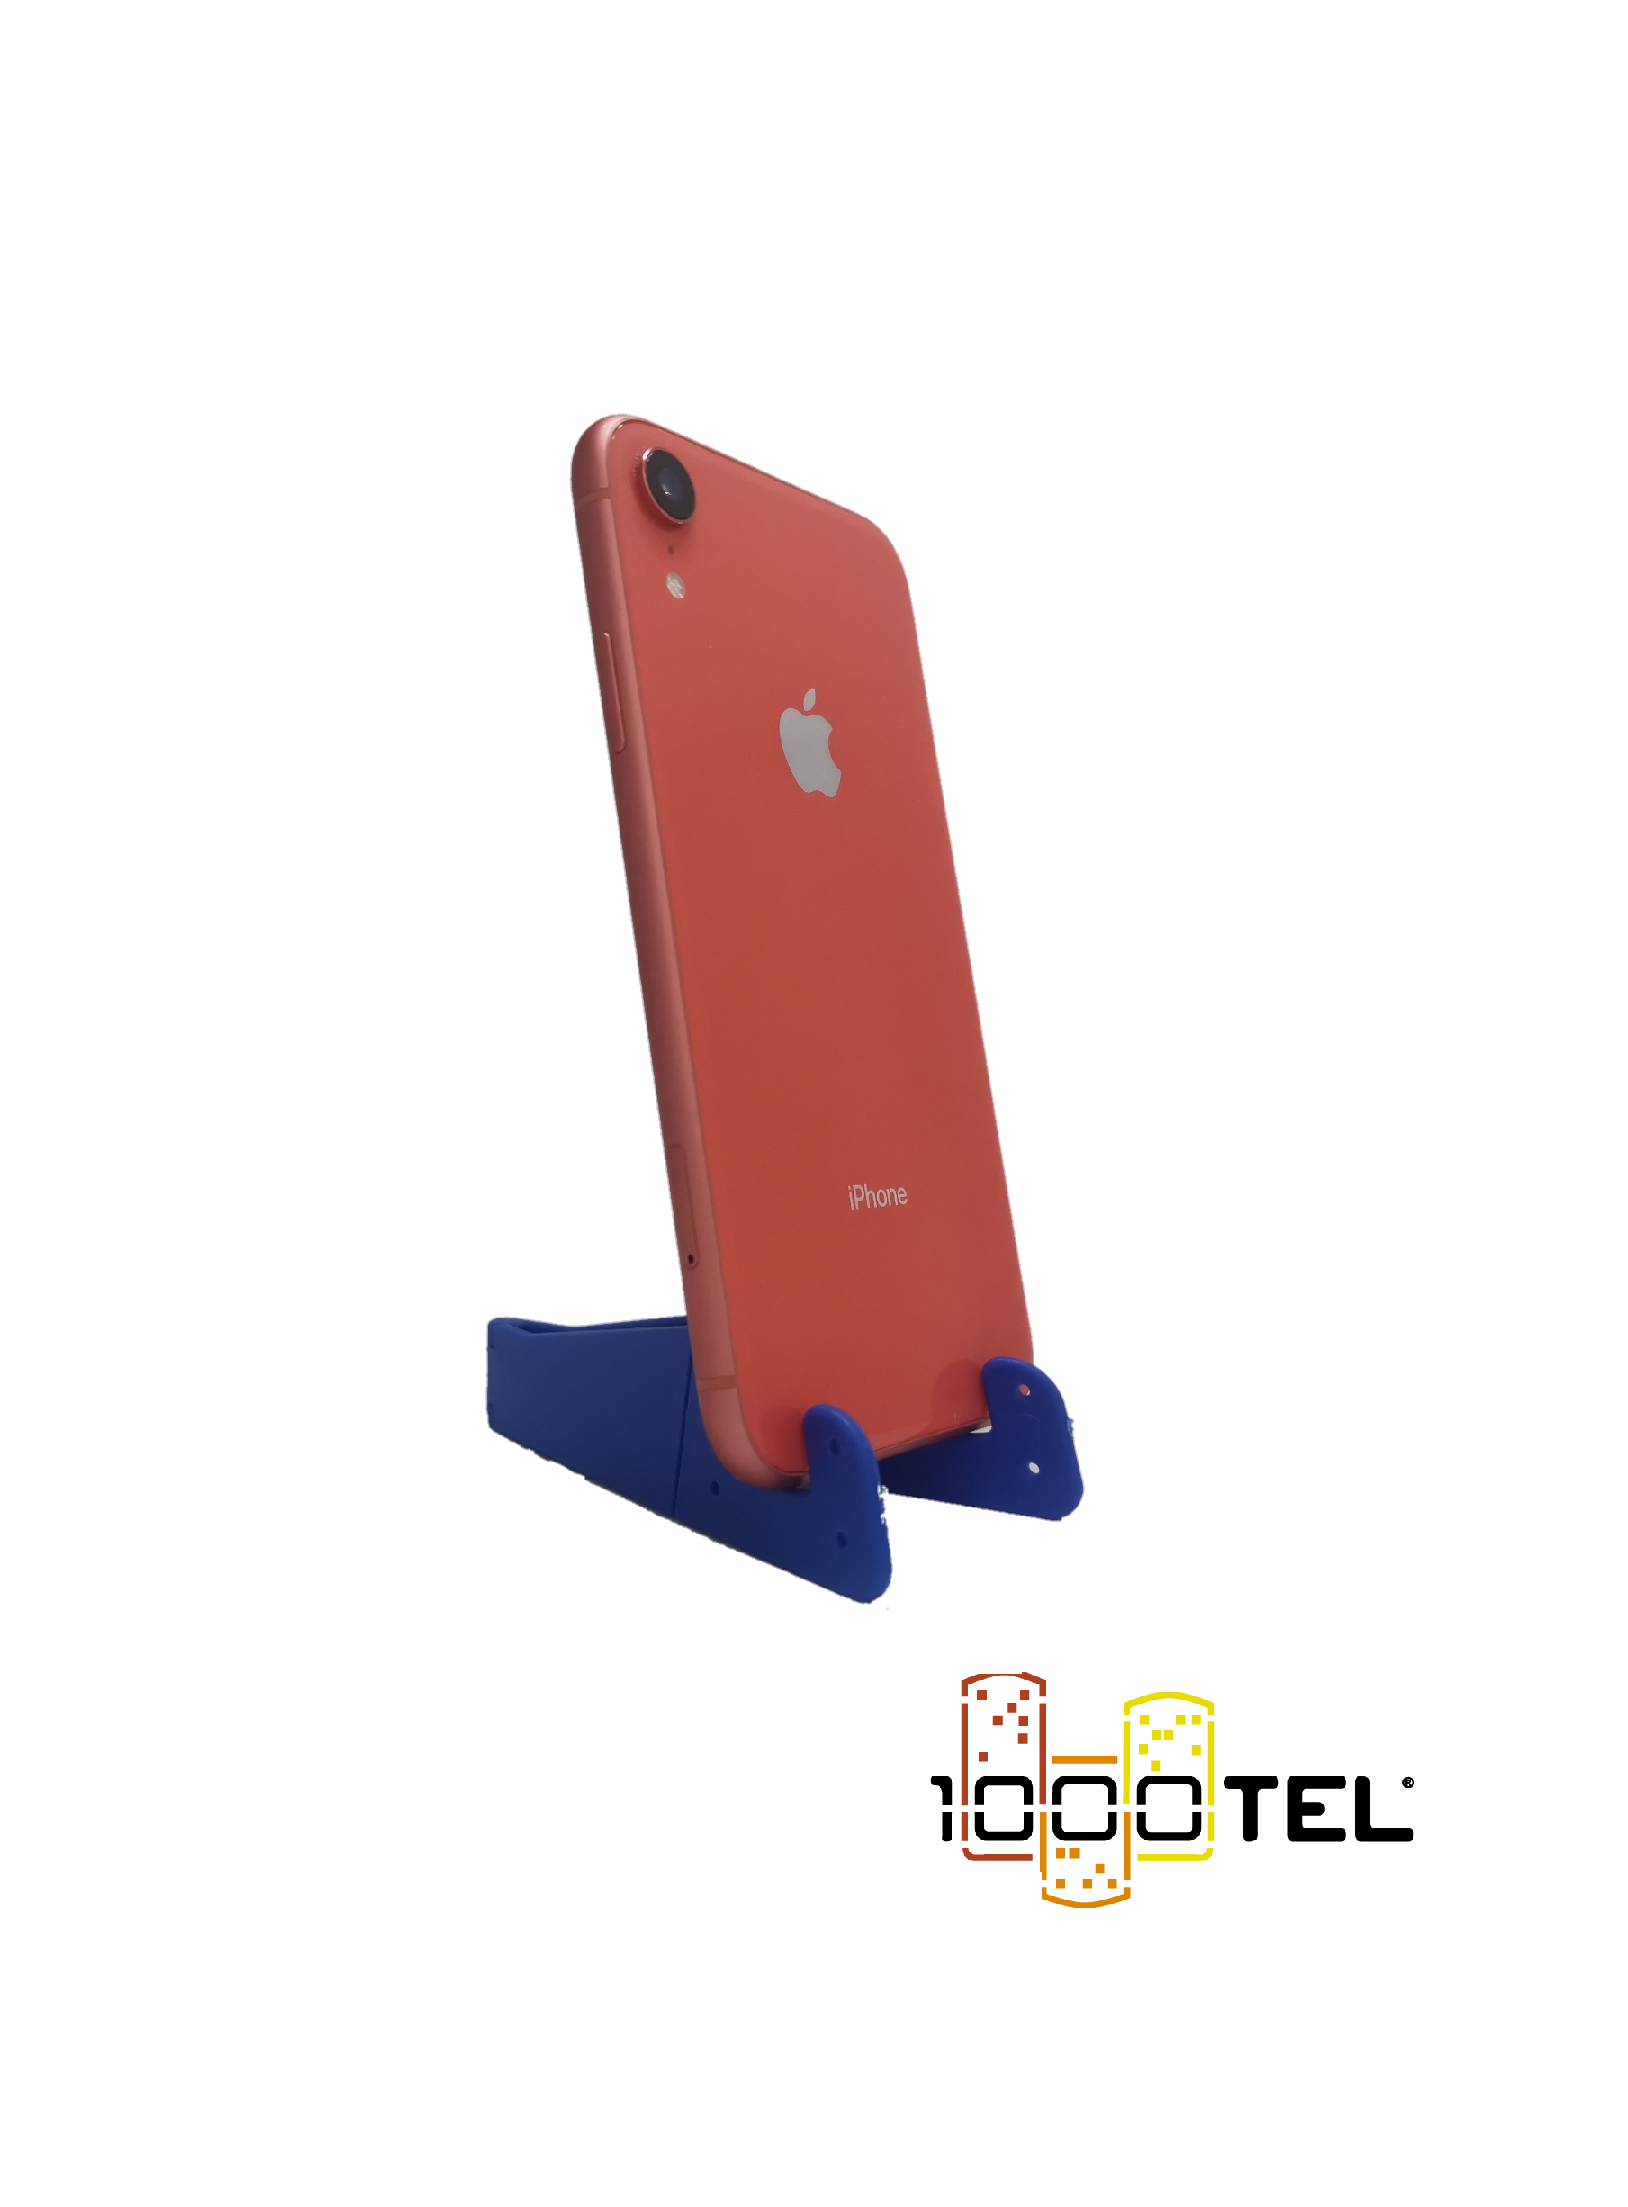 Iphone XR 64GB Coral #3